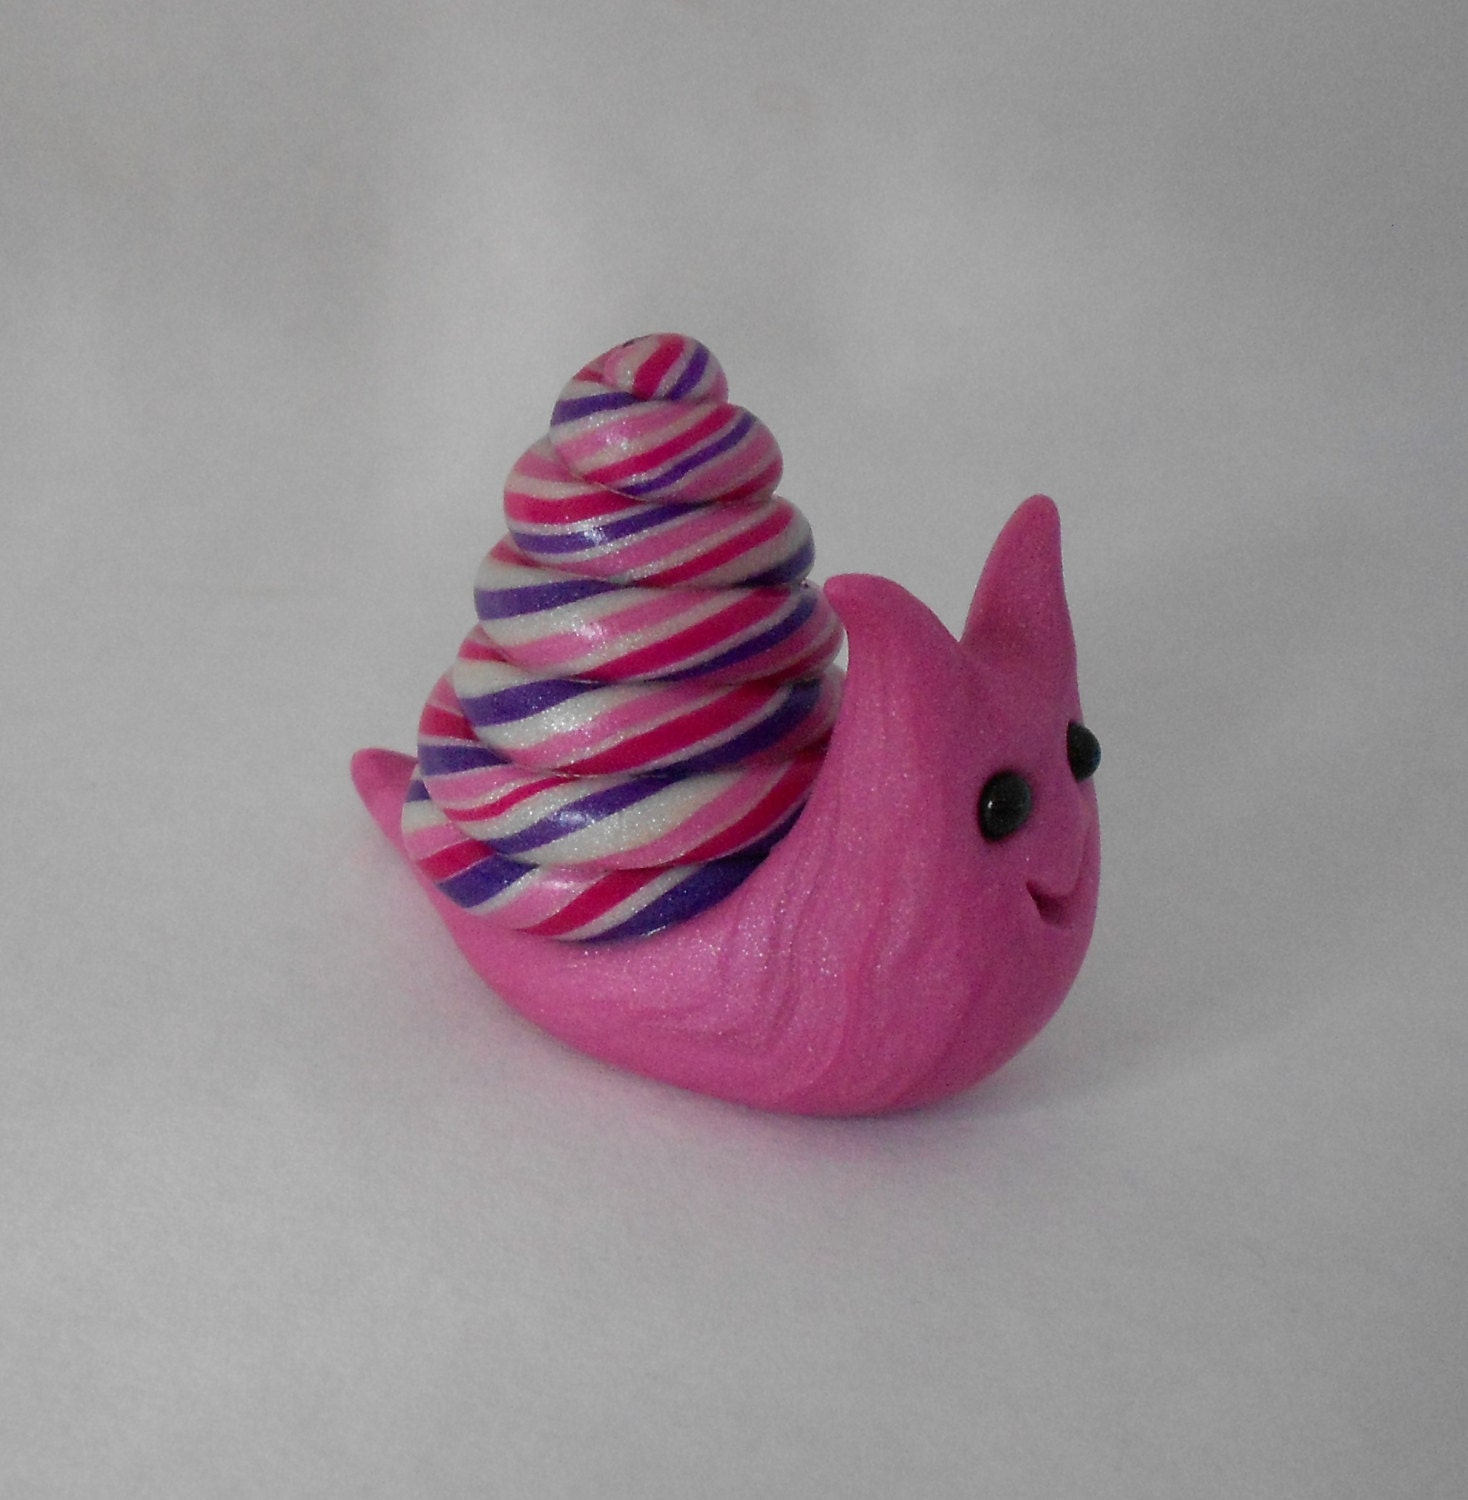 Pearly Pink Snail - happycreations4u